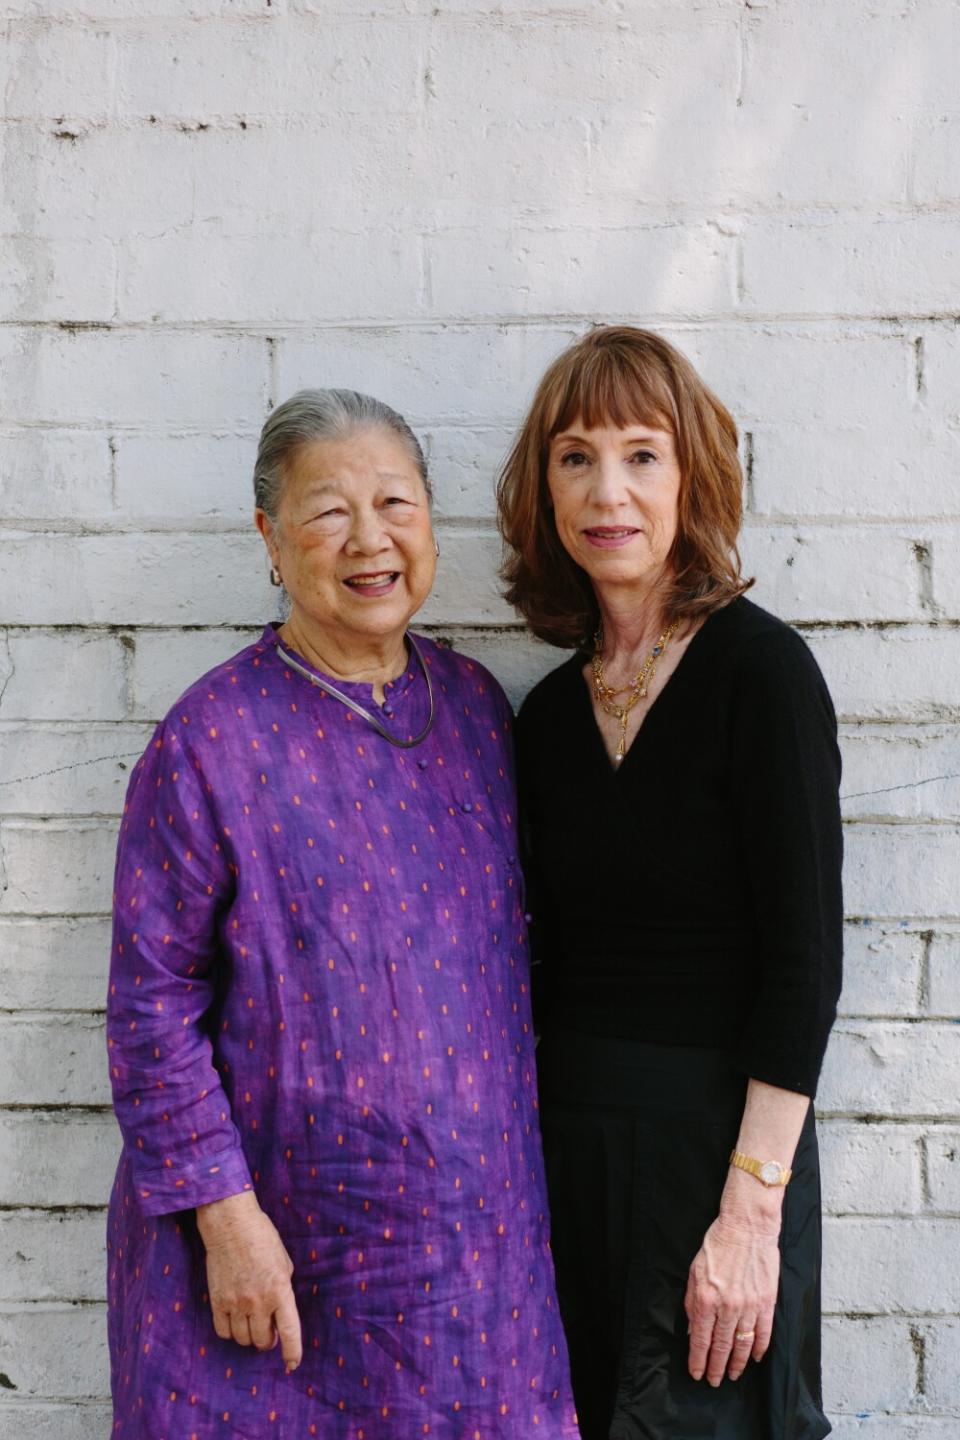 Two women pose for a portrait against a white wall.